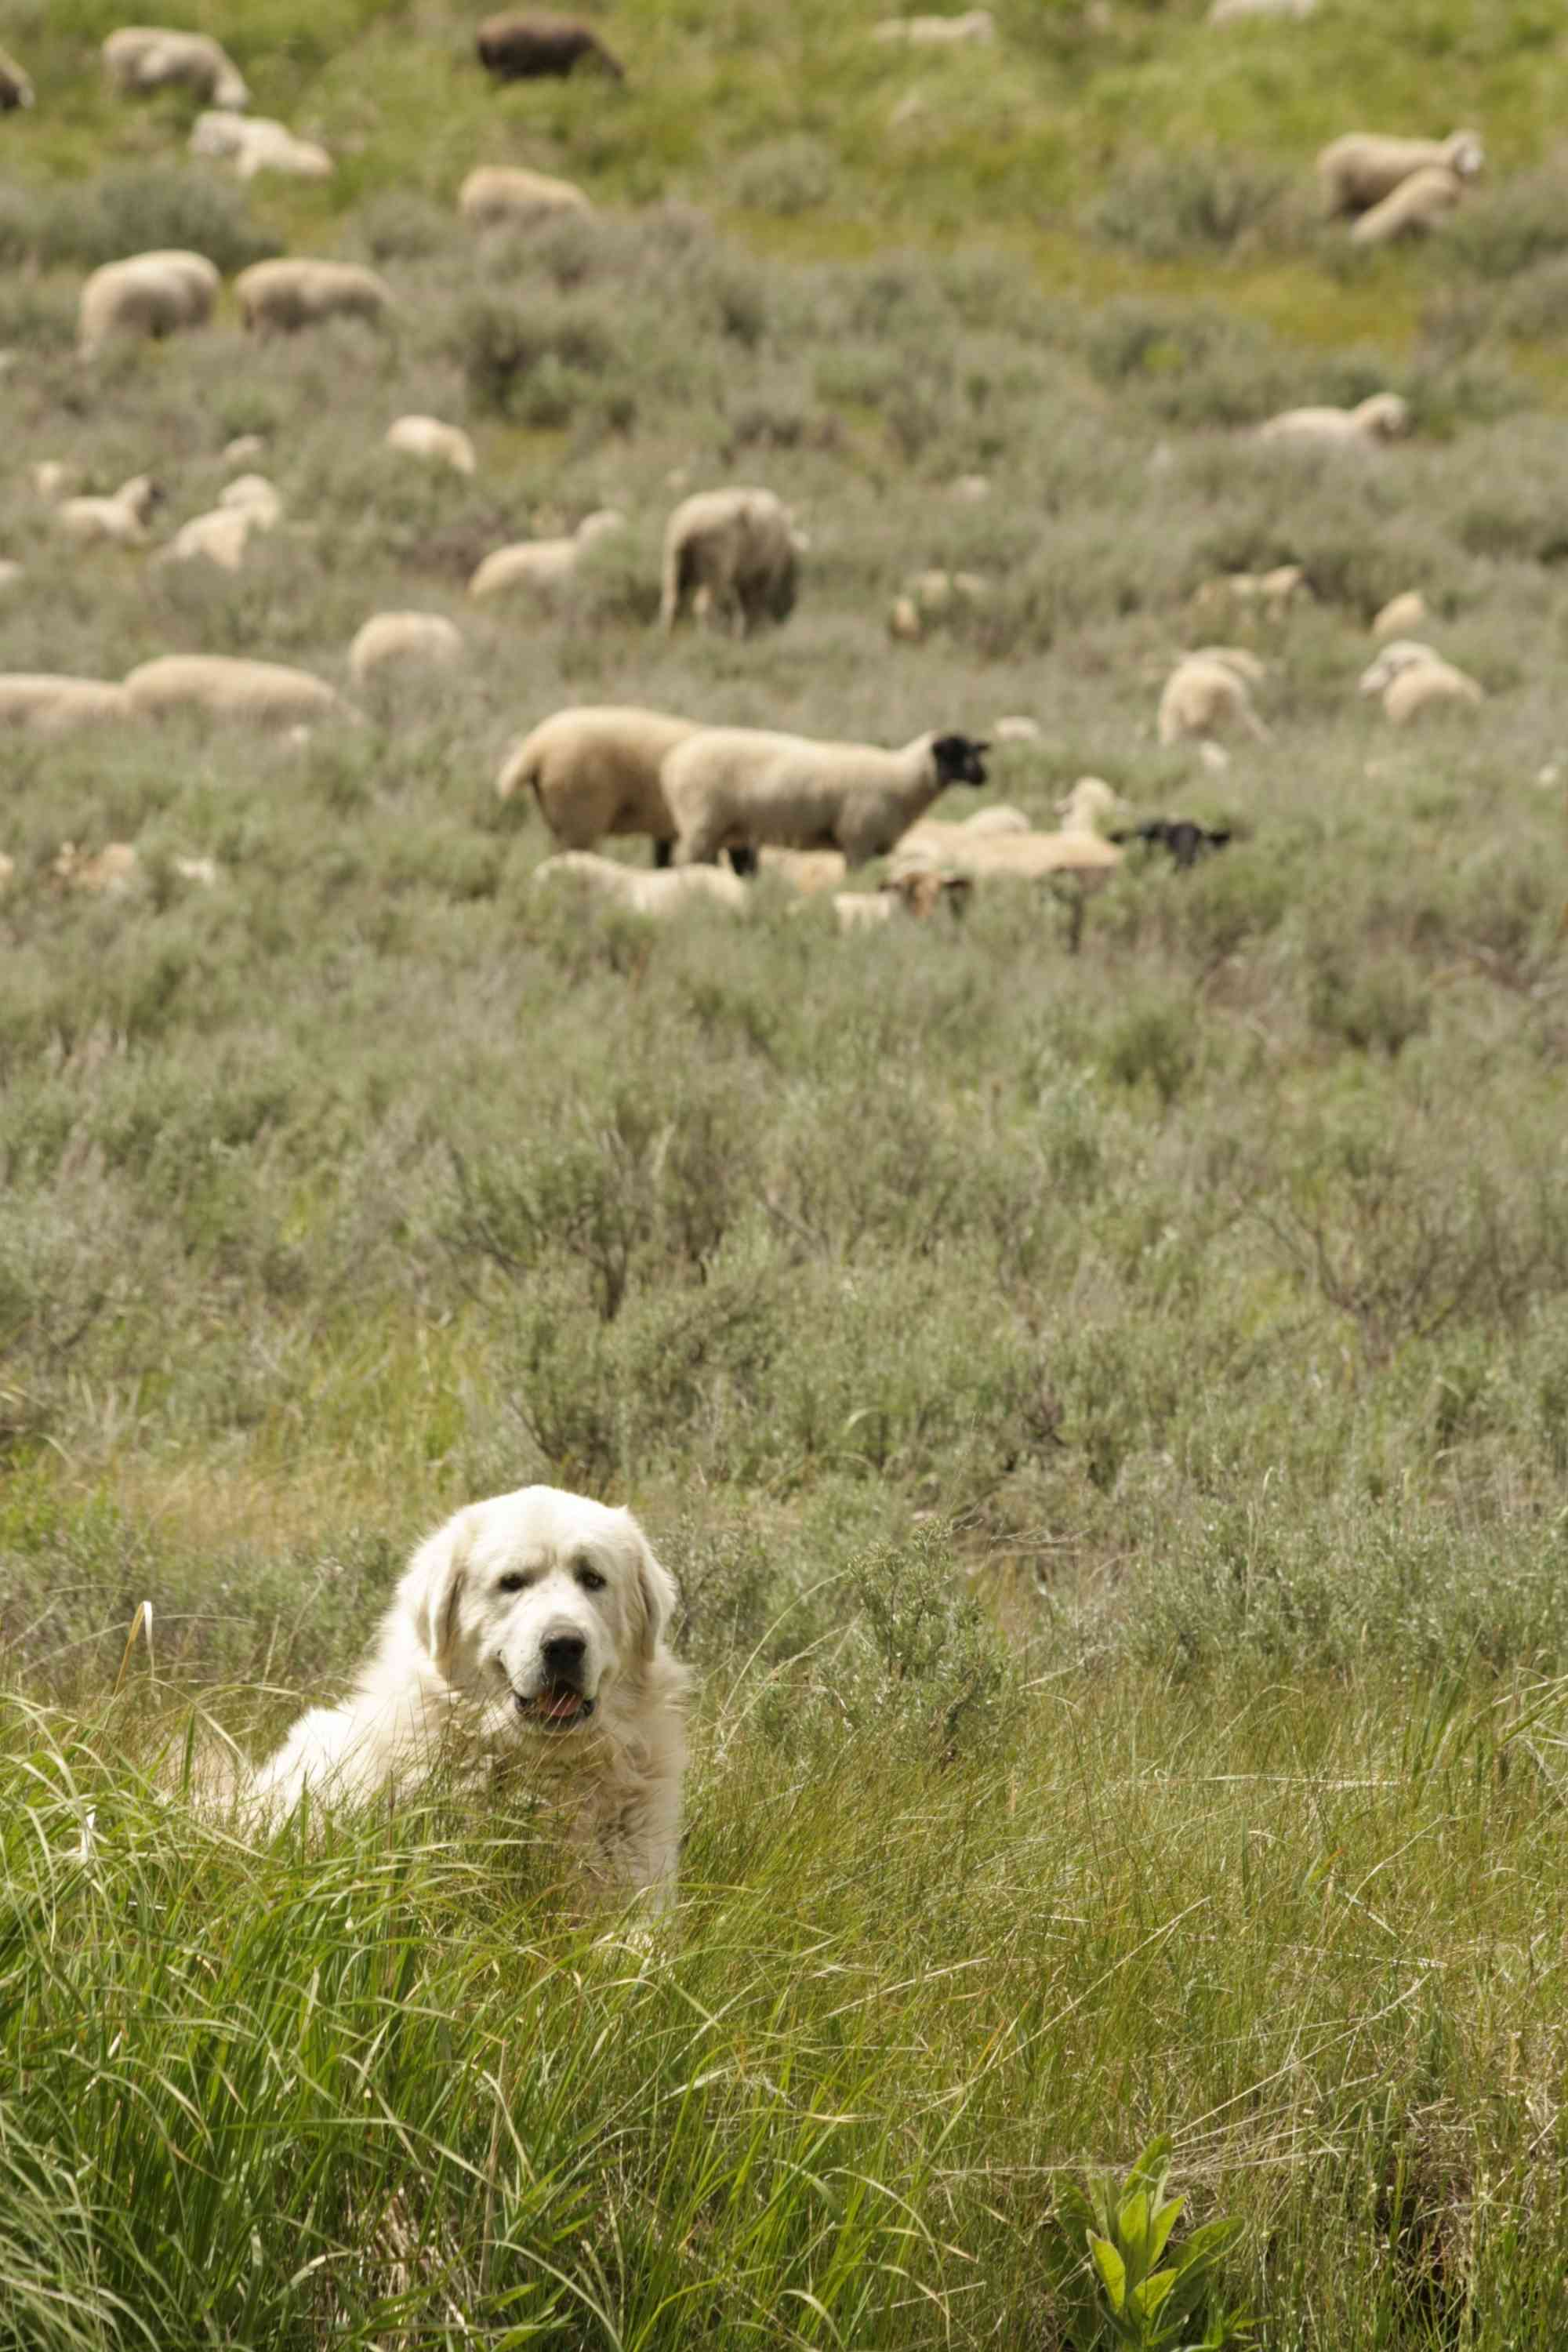 Wood River Guardian Dog with sheep in the background